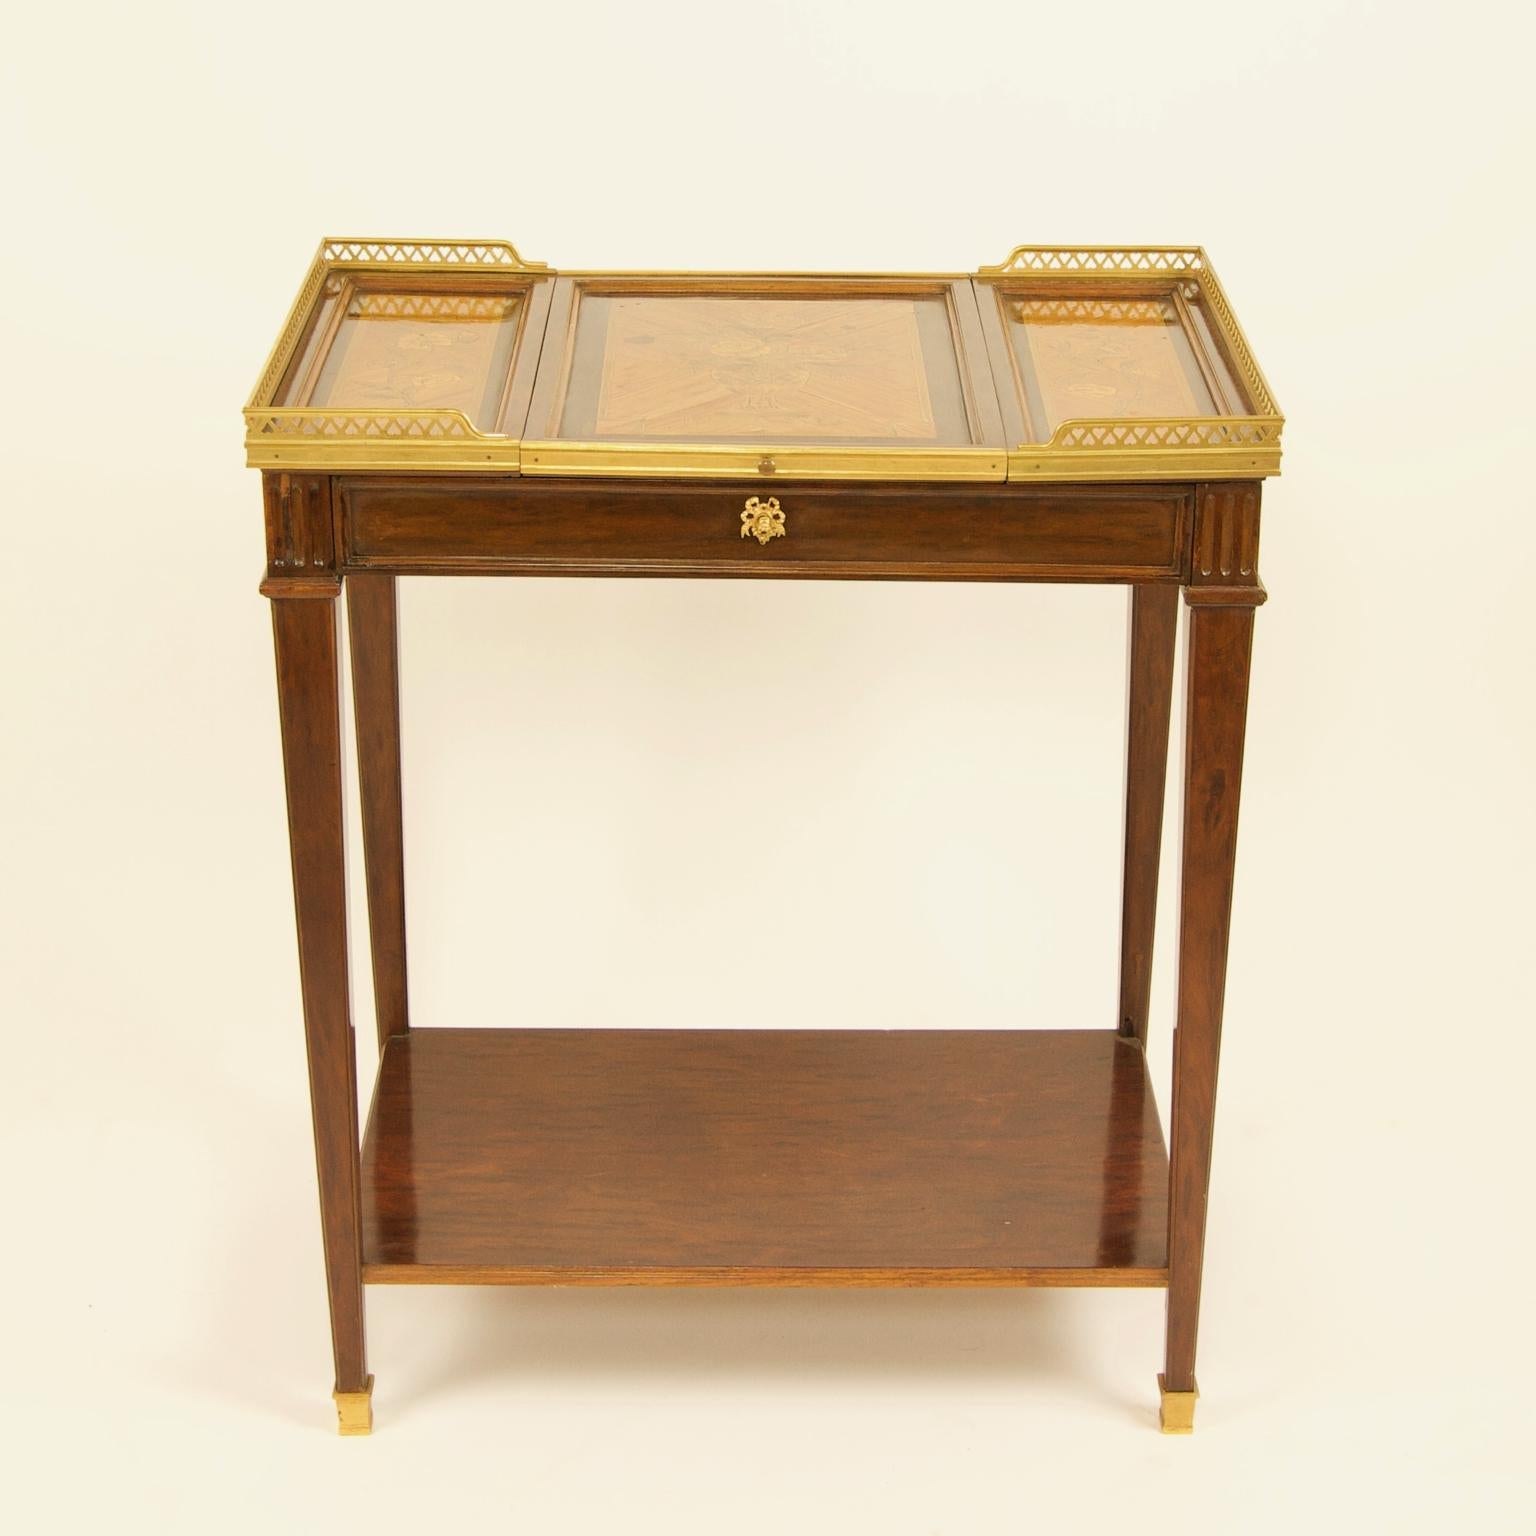 19th century Louis XVI style gilt bronze mounted floral marquetry poudreuse vanity or dressing table

A 19th century Louis XVI style gilt-bronze mounted marquetry poudreuse or dressing table standing on four slender tapering legs with gilt bronze